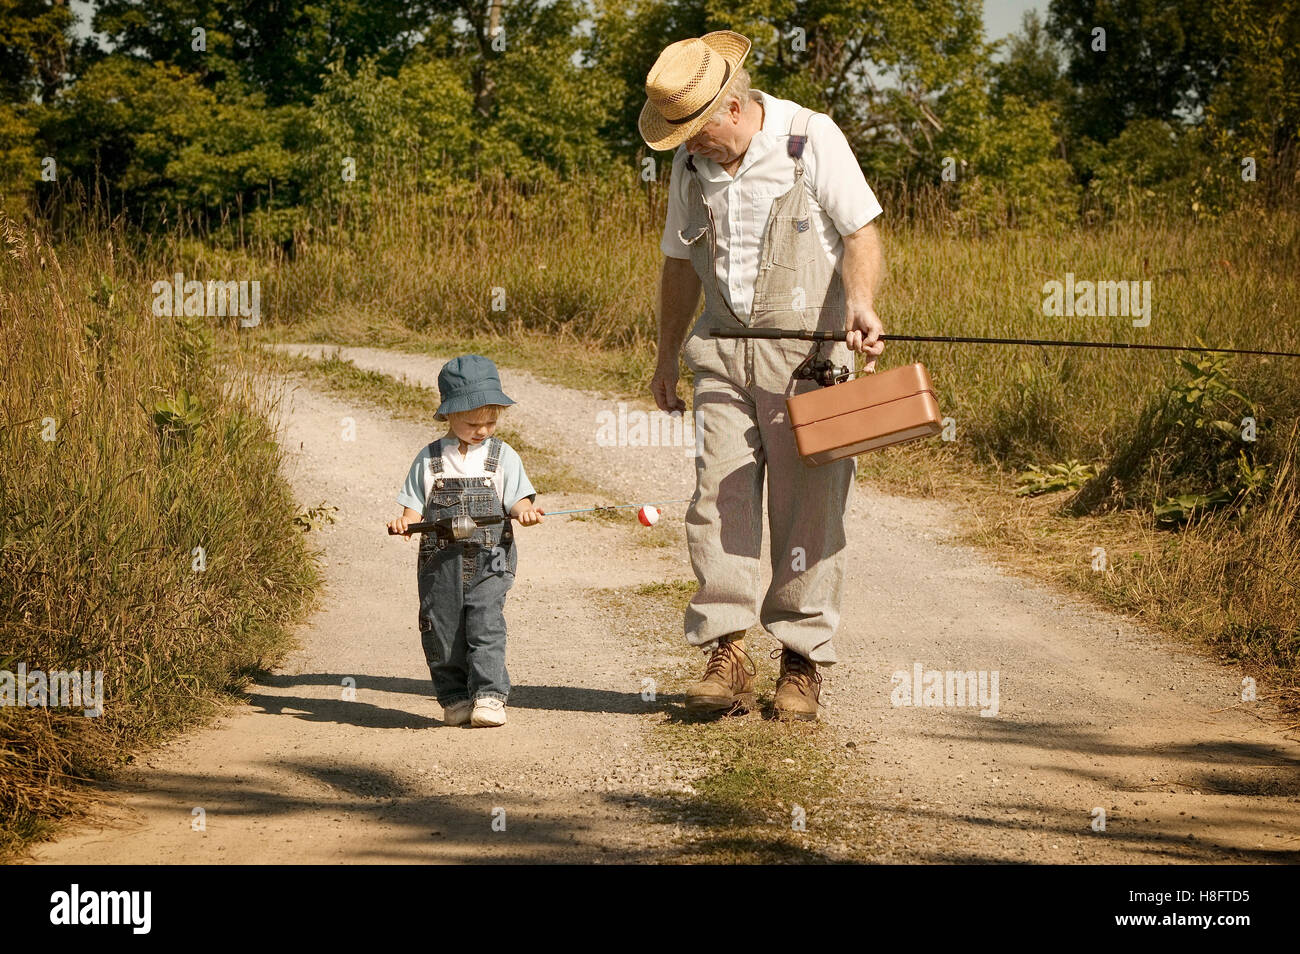 https://c8.alamy.com/comp/H8FTD5/grandfather-and-grandson-going-fishing-H8FTD5.jpg